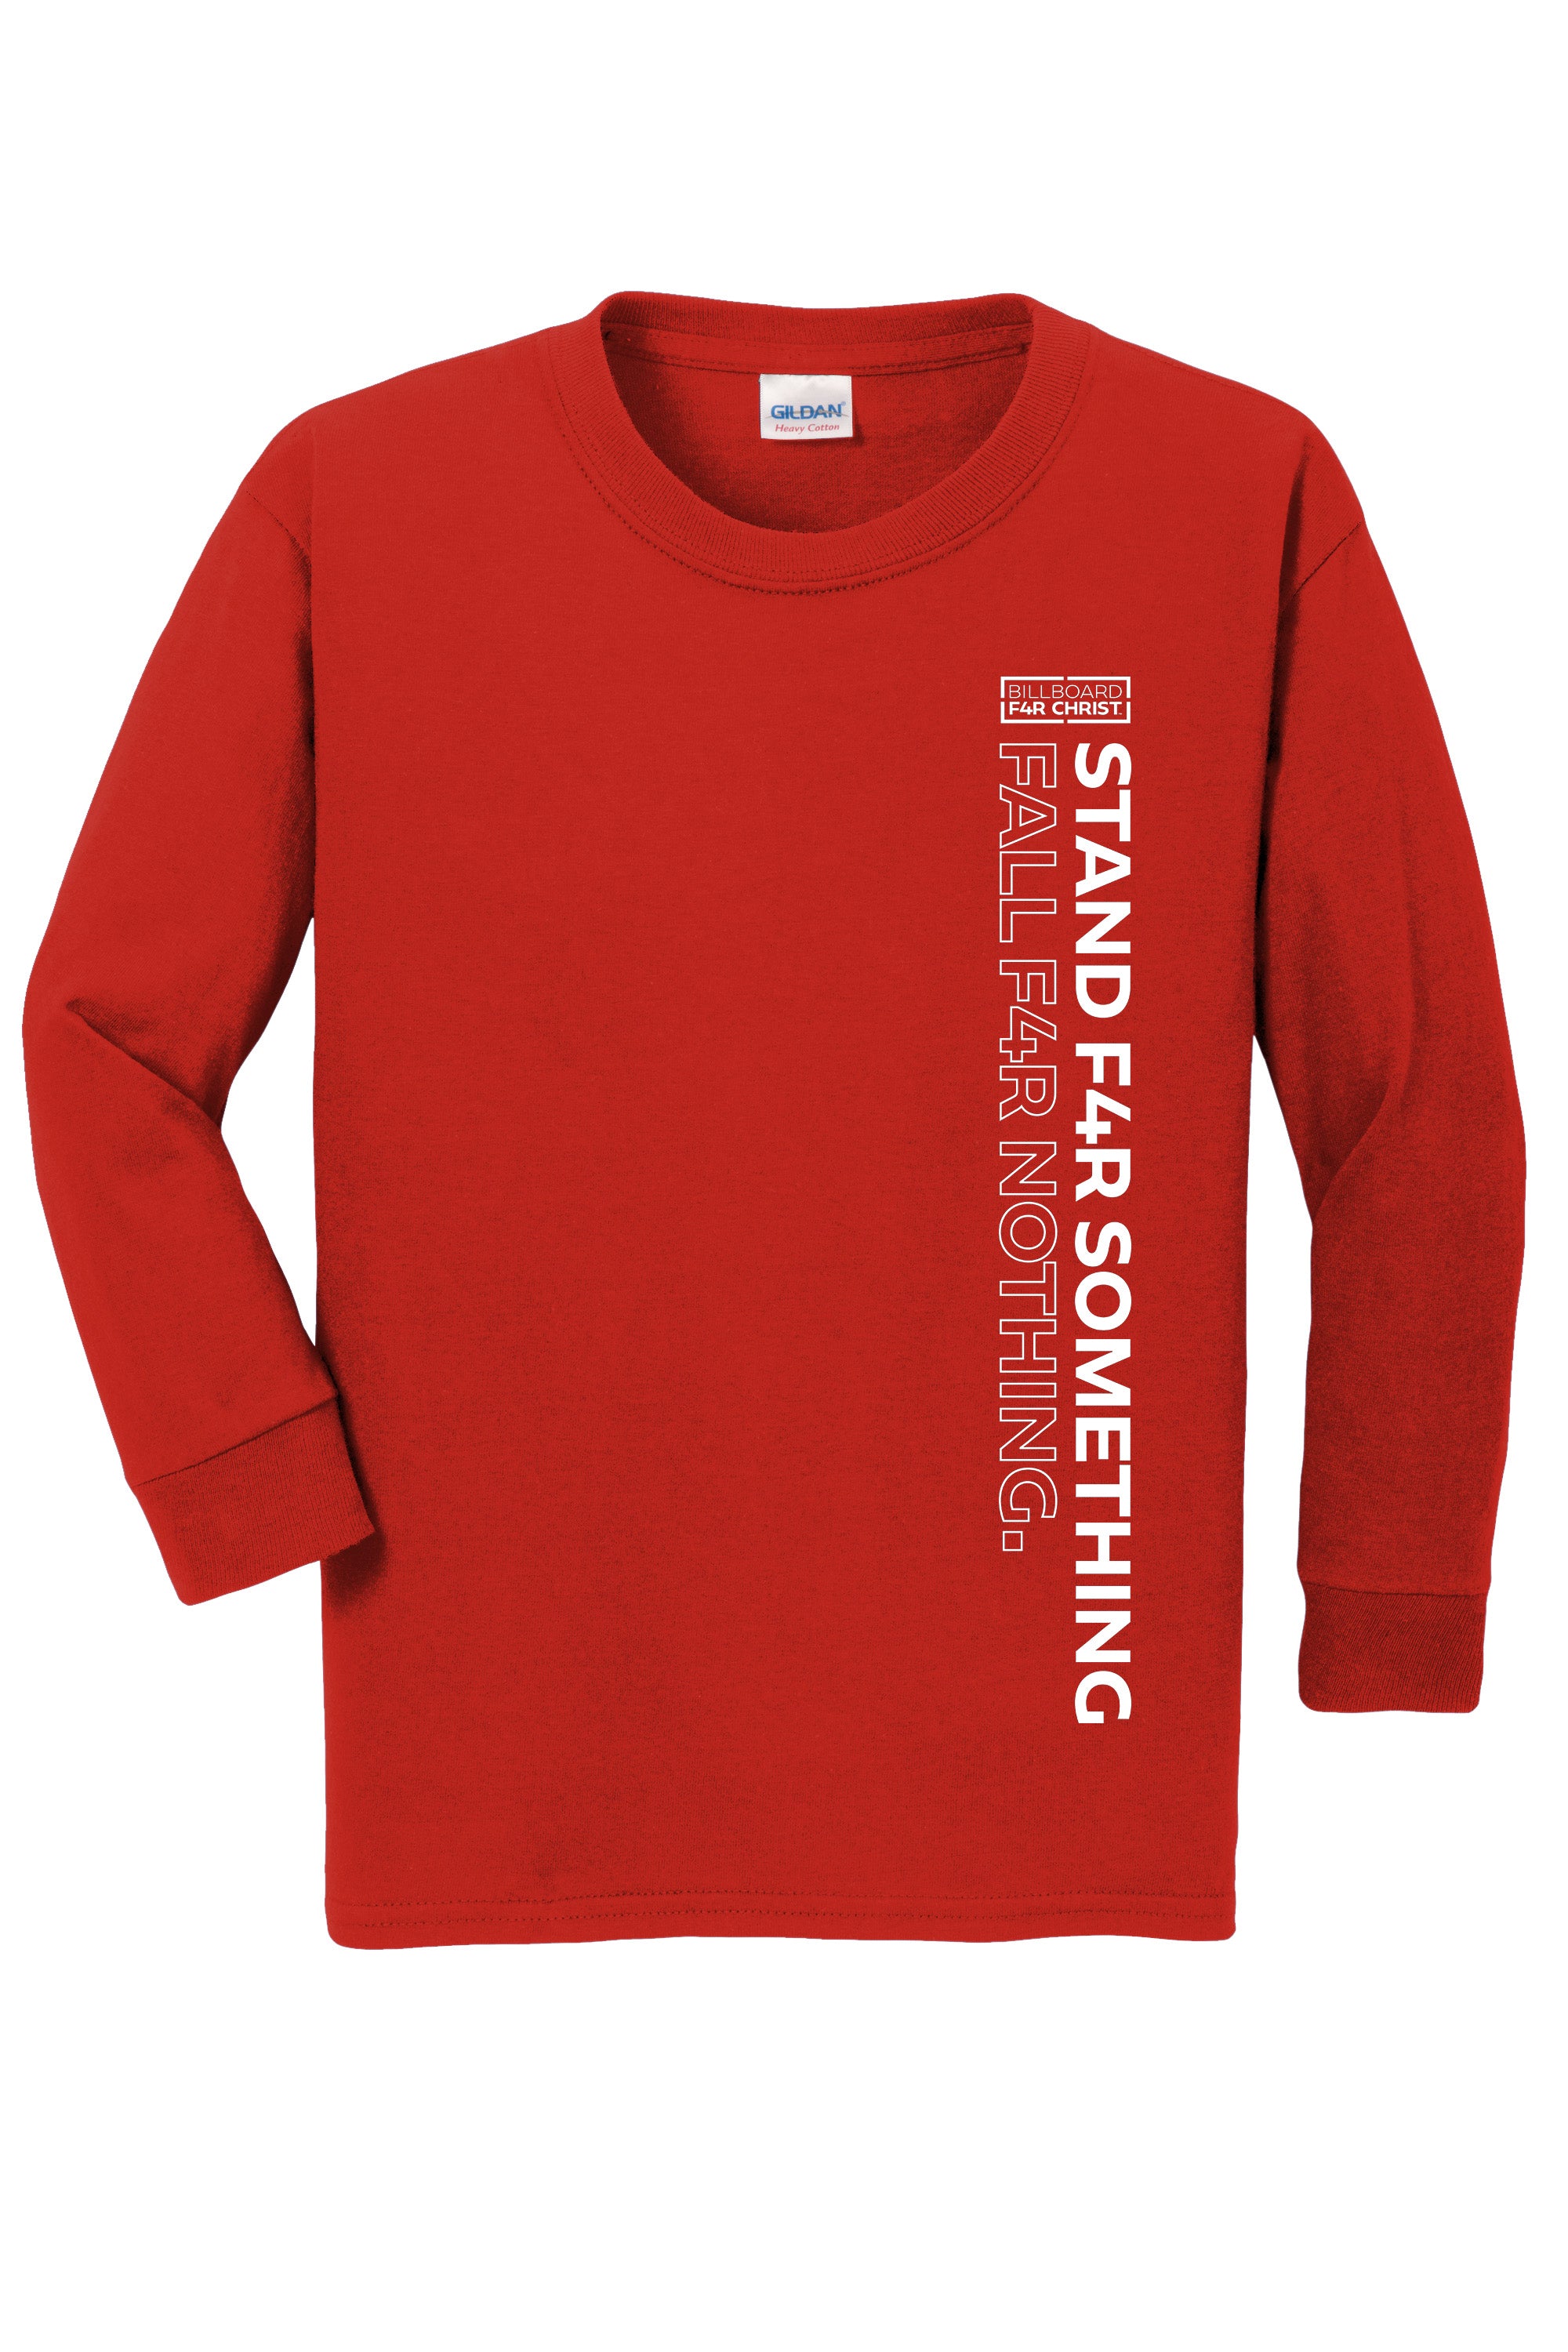 Stand F4R Something Youth Long Sleeve